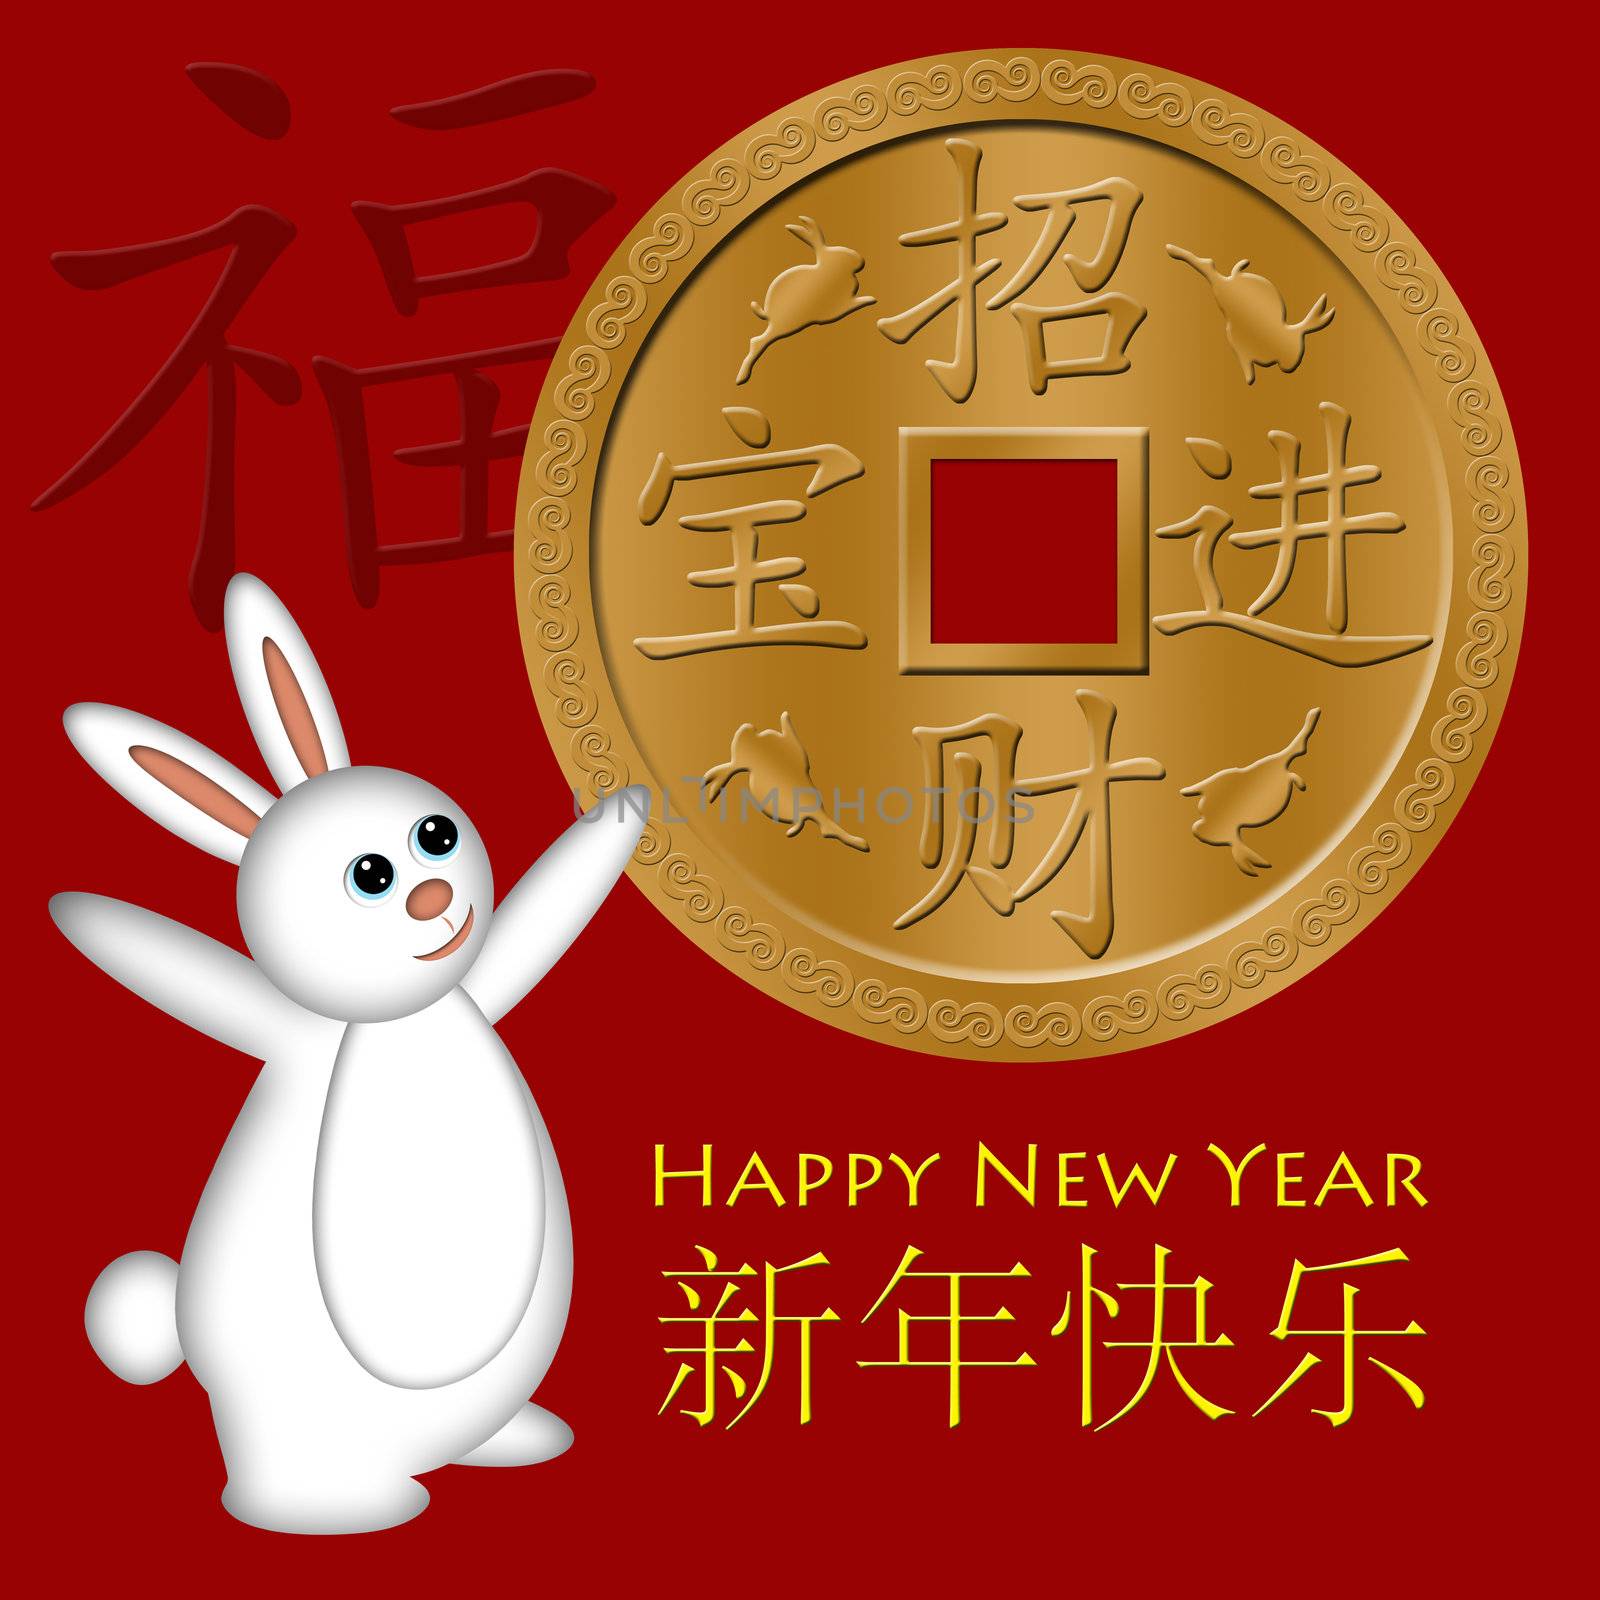 Rabbit Welcoming the Chinese New Year with Gold Coin Illustration Red Background